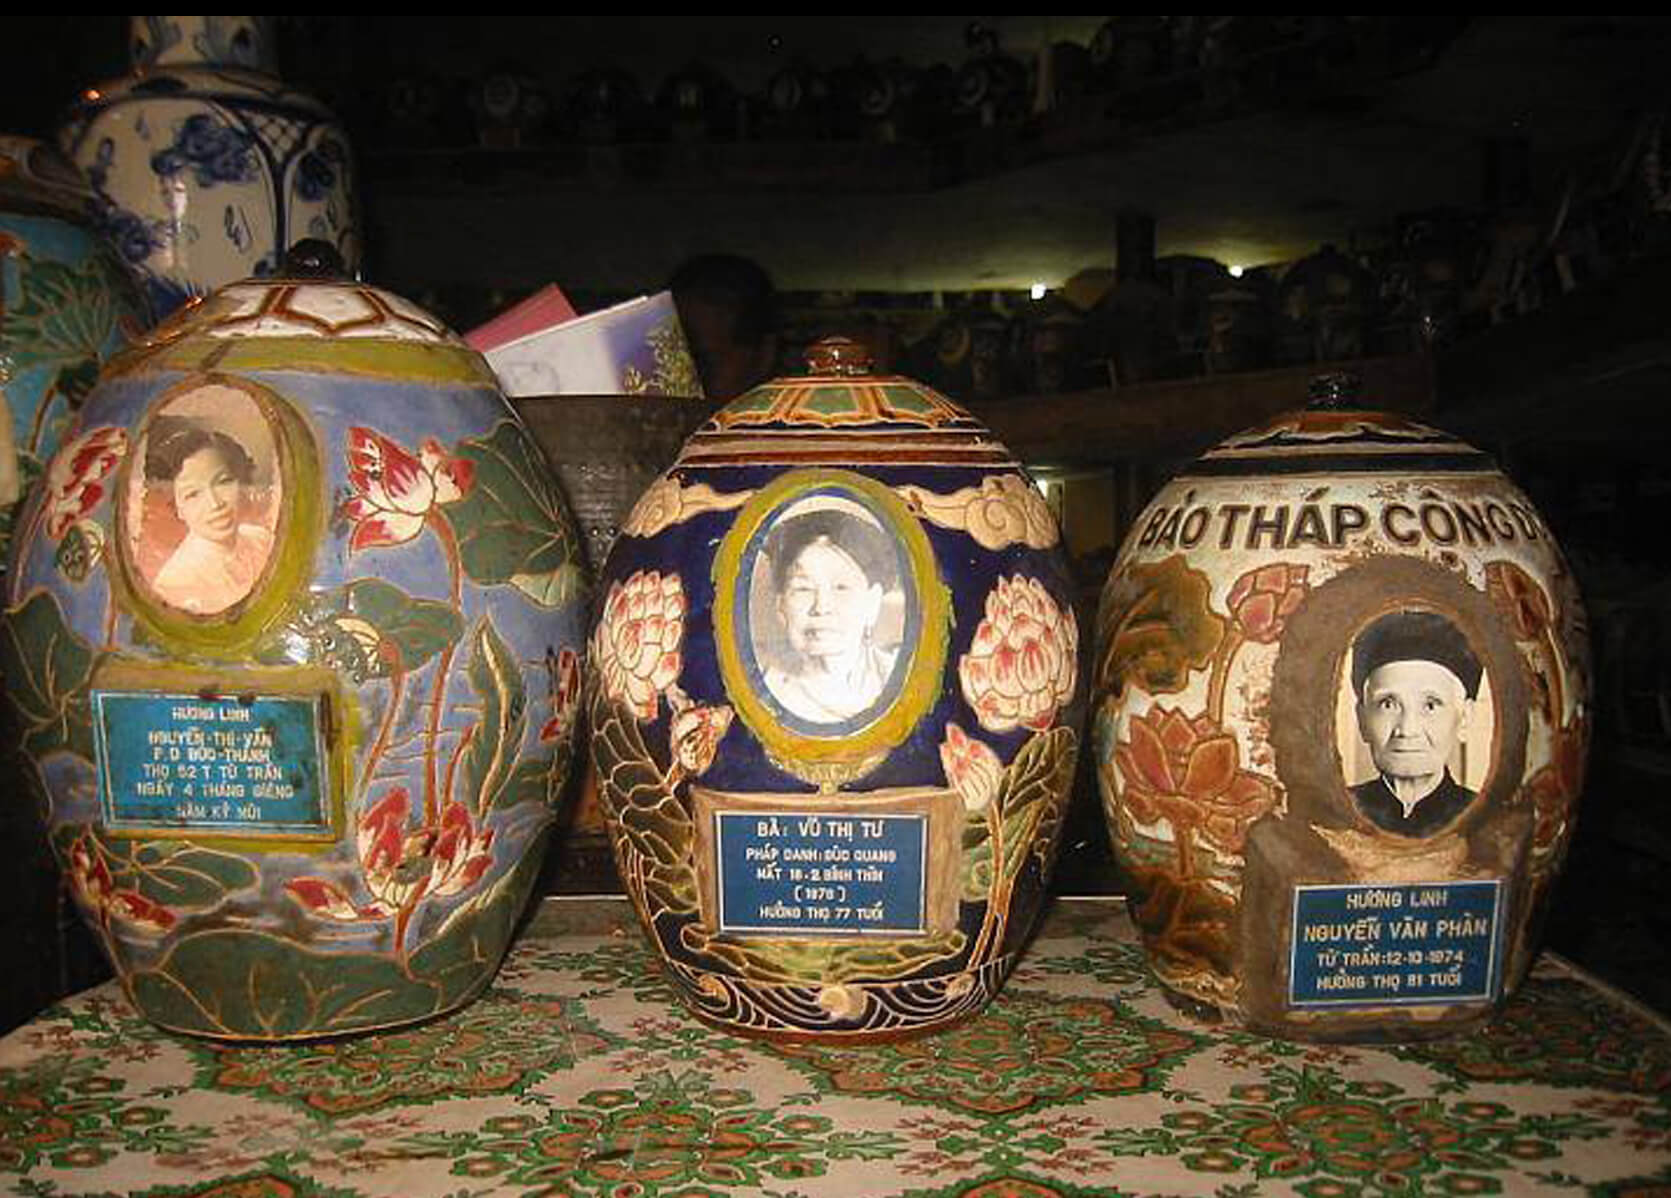 Three decorative Vietnamese pottery urns with photos of women on them.